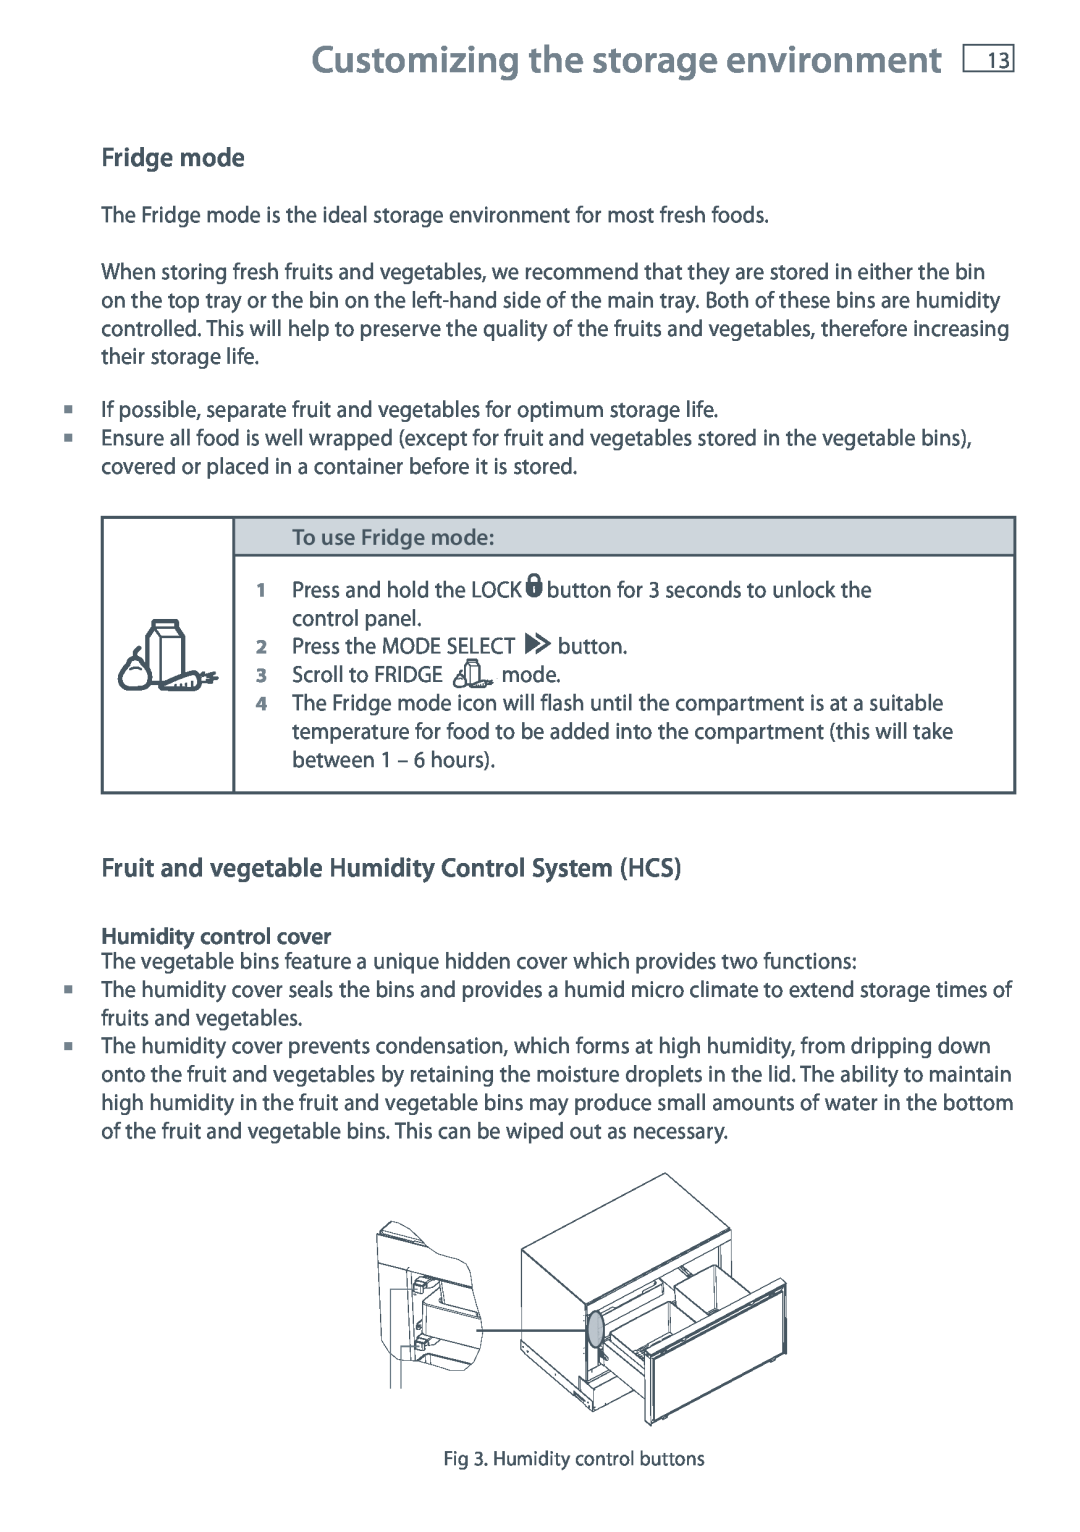 Fisher & Paykel RB90S Fridge mode, Fruit and vegetable Humidity Control System HCS, Customizing the storage environment 